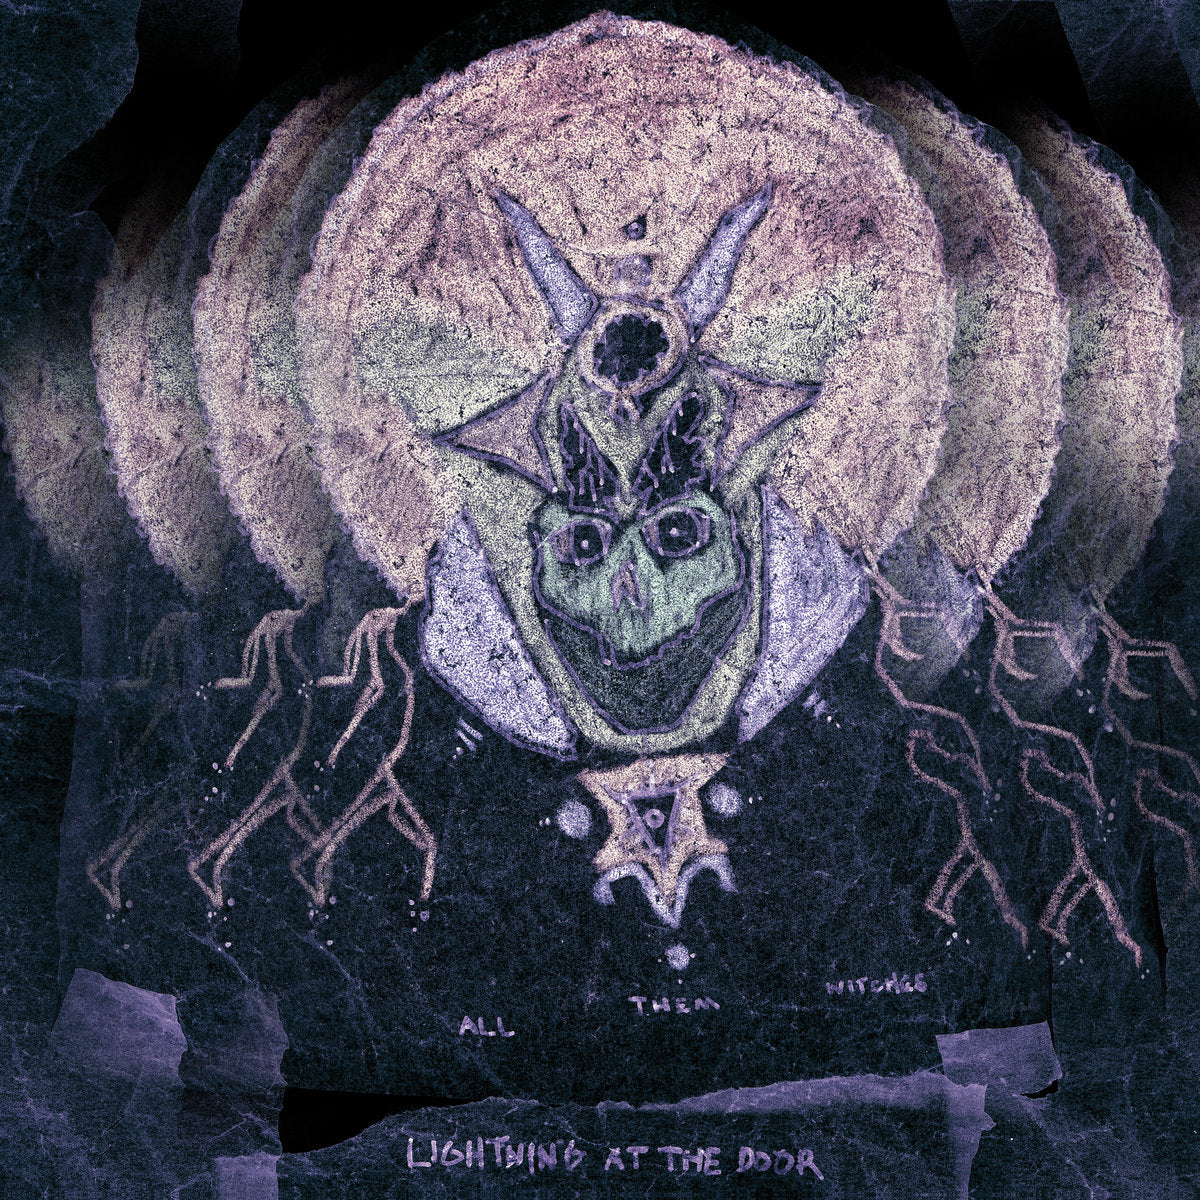  |  Vinyl LP | All Them Witches - Lightning At the Door (LP) | Records on Vinyl